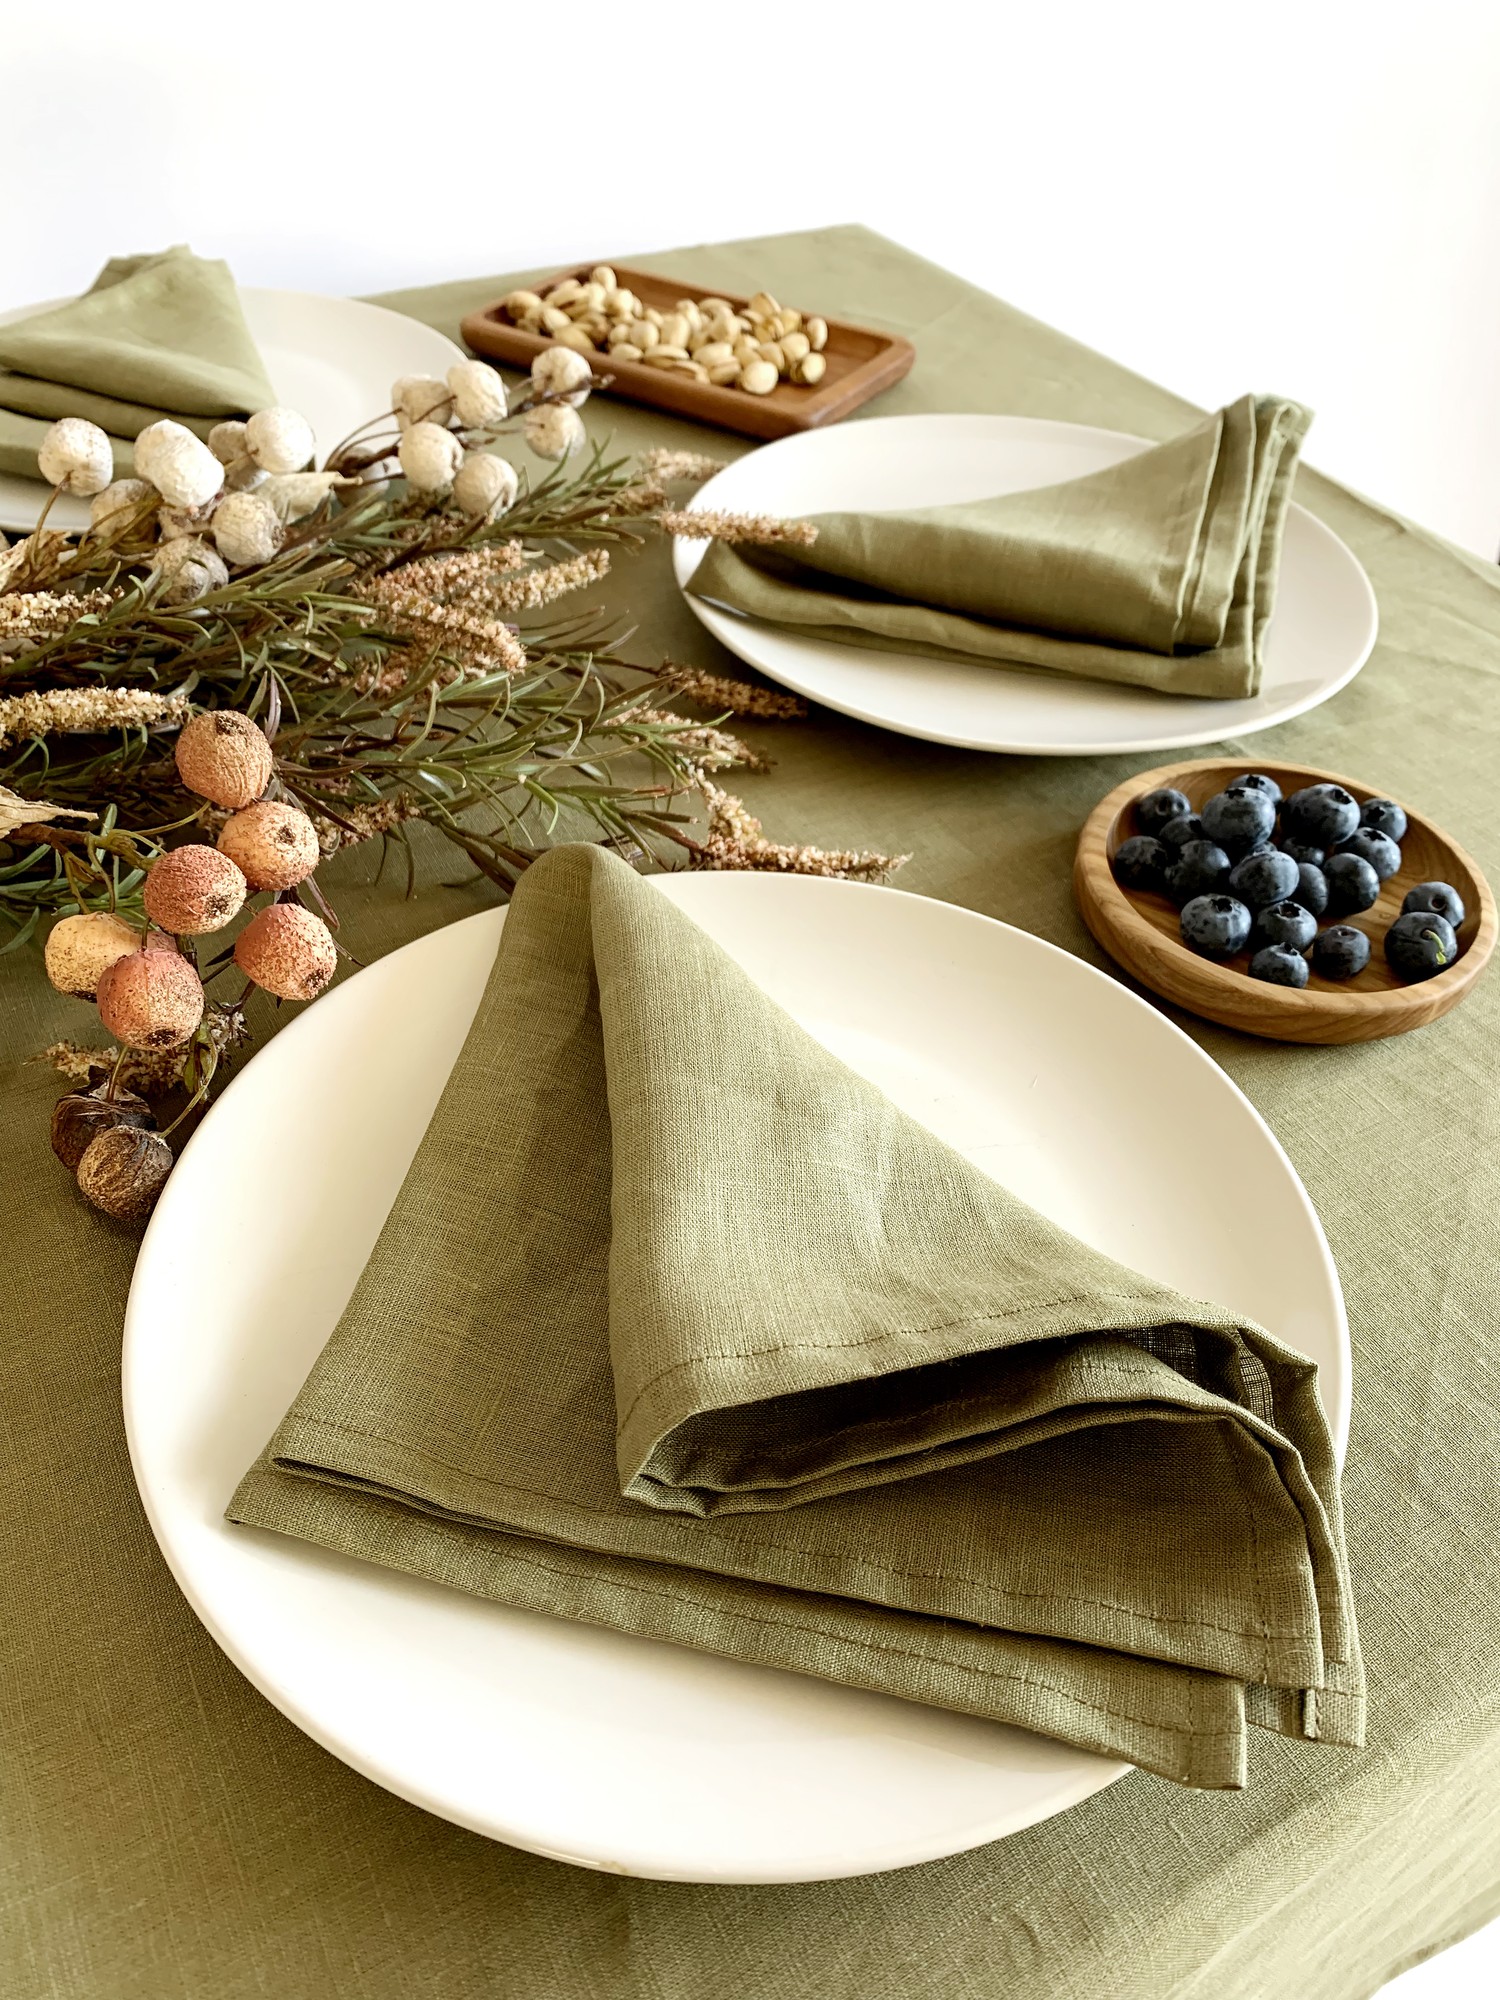 Set of 2 Moss Olive green Cloth Napkins for Weddings and Dinners - 10'' x 10'' (25 x 25 cm)